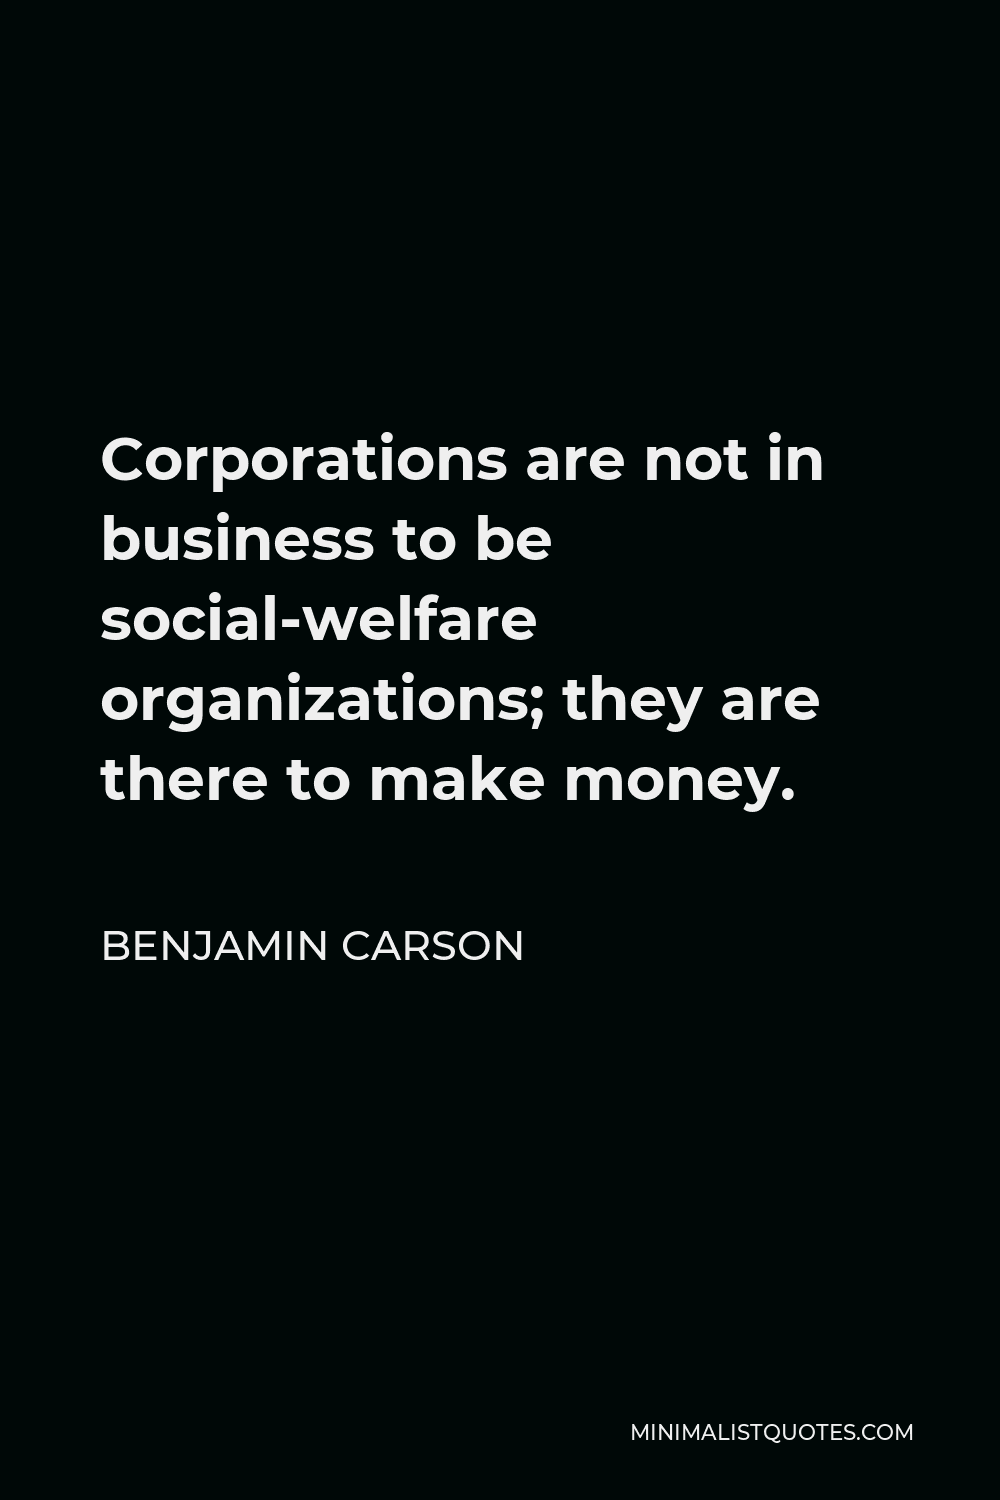 Benjamin Carson Quote - Corporations are not in business to be social-welfare organizations; they are there to make money.